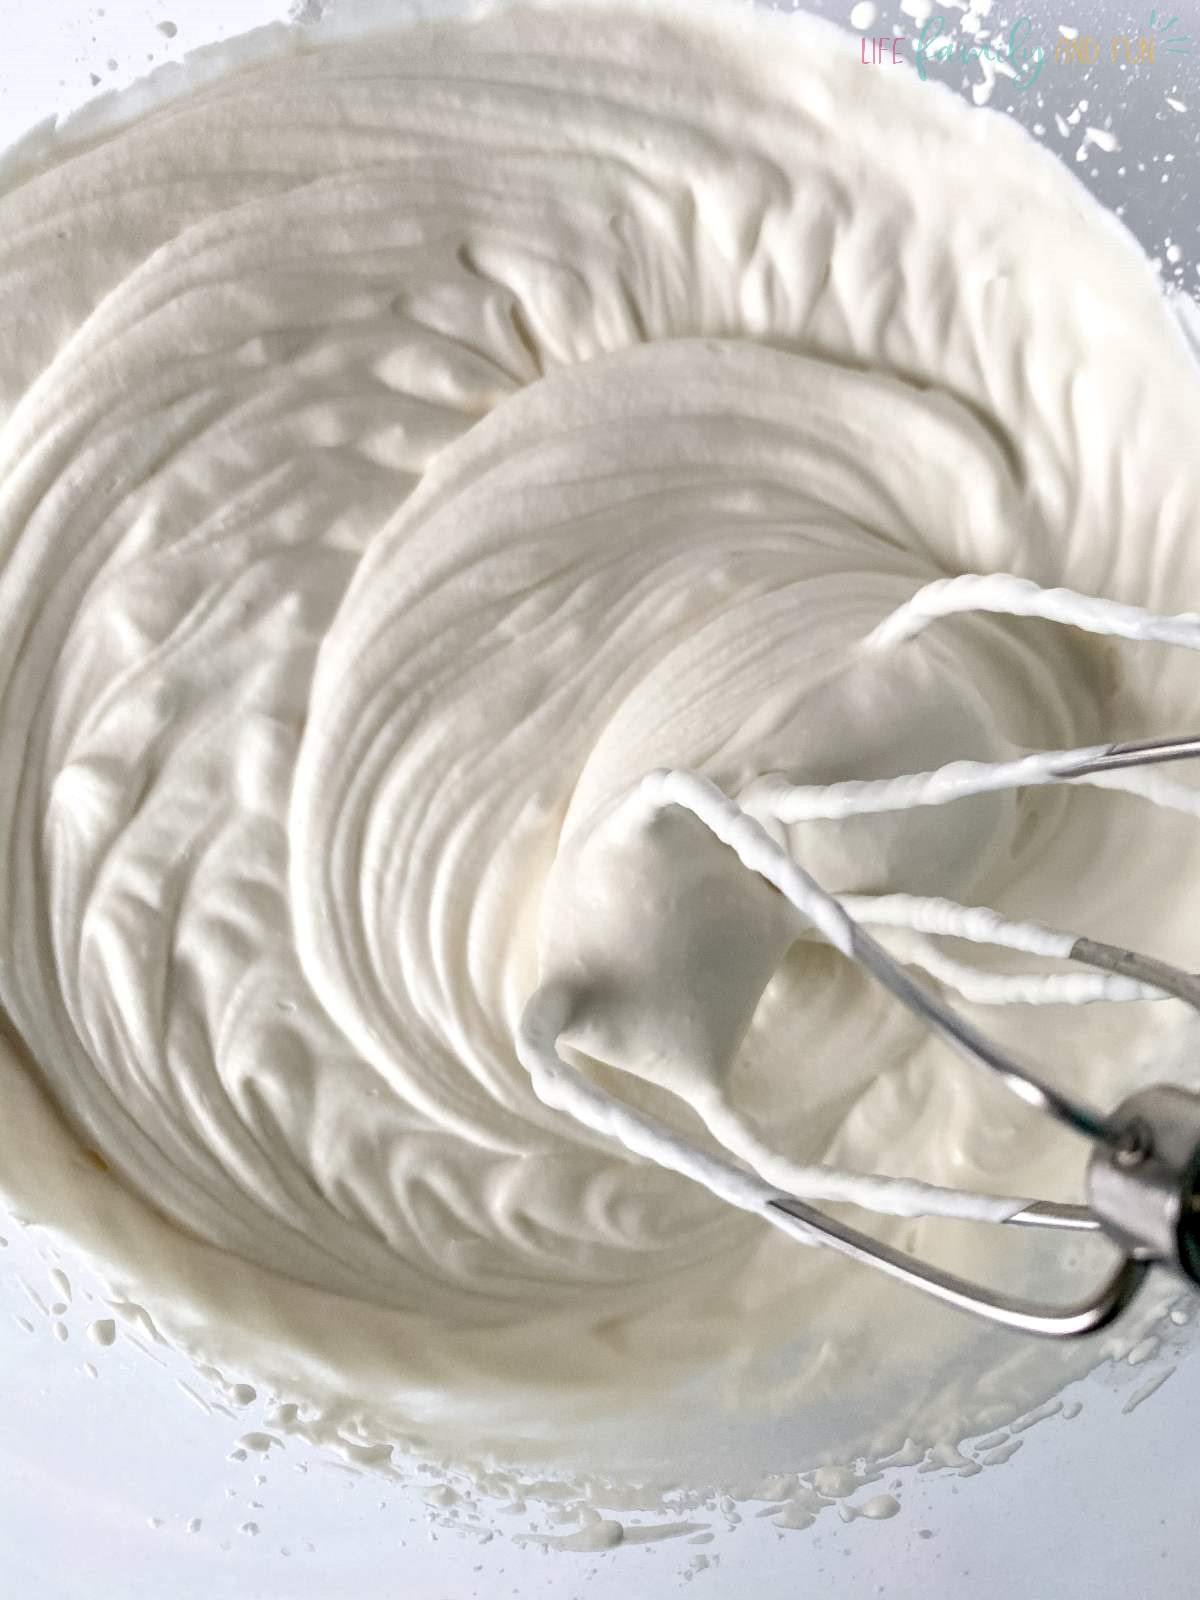 Homemade whipped cream - INGREDIENTS - blend